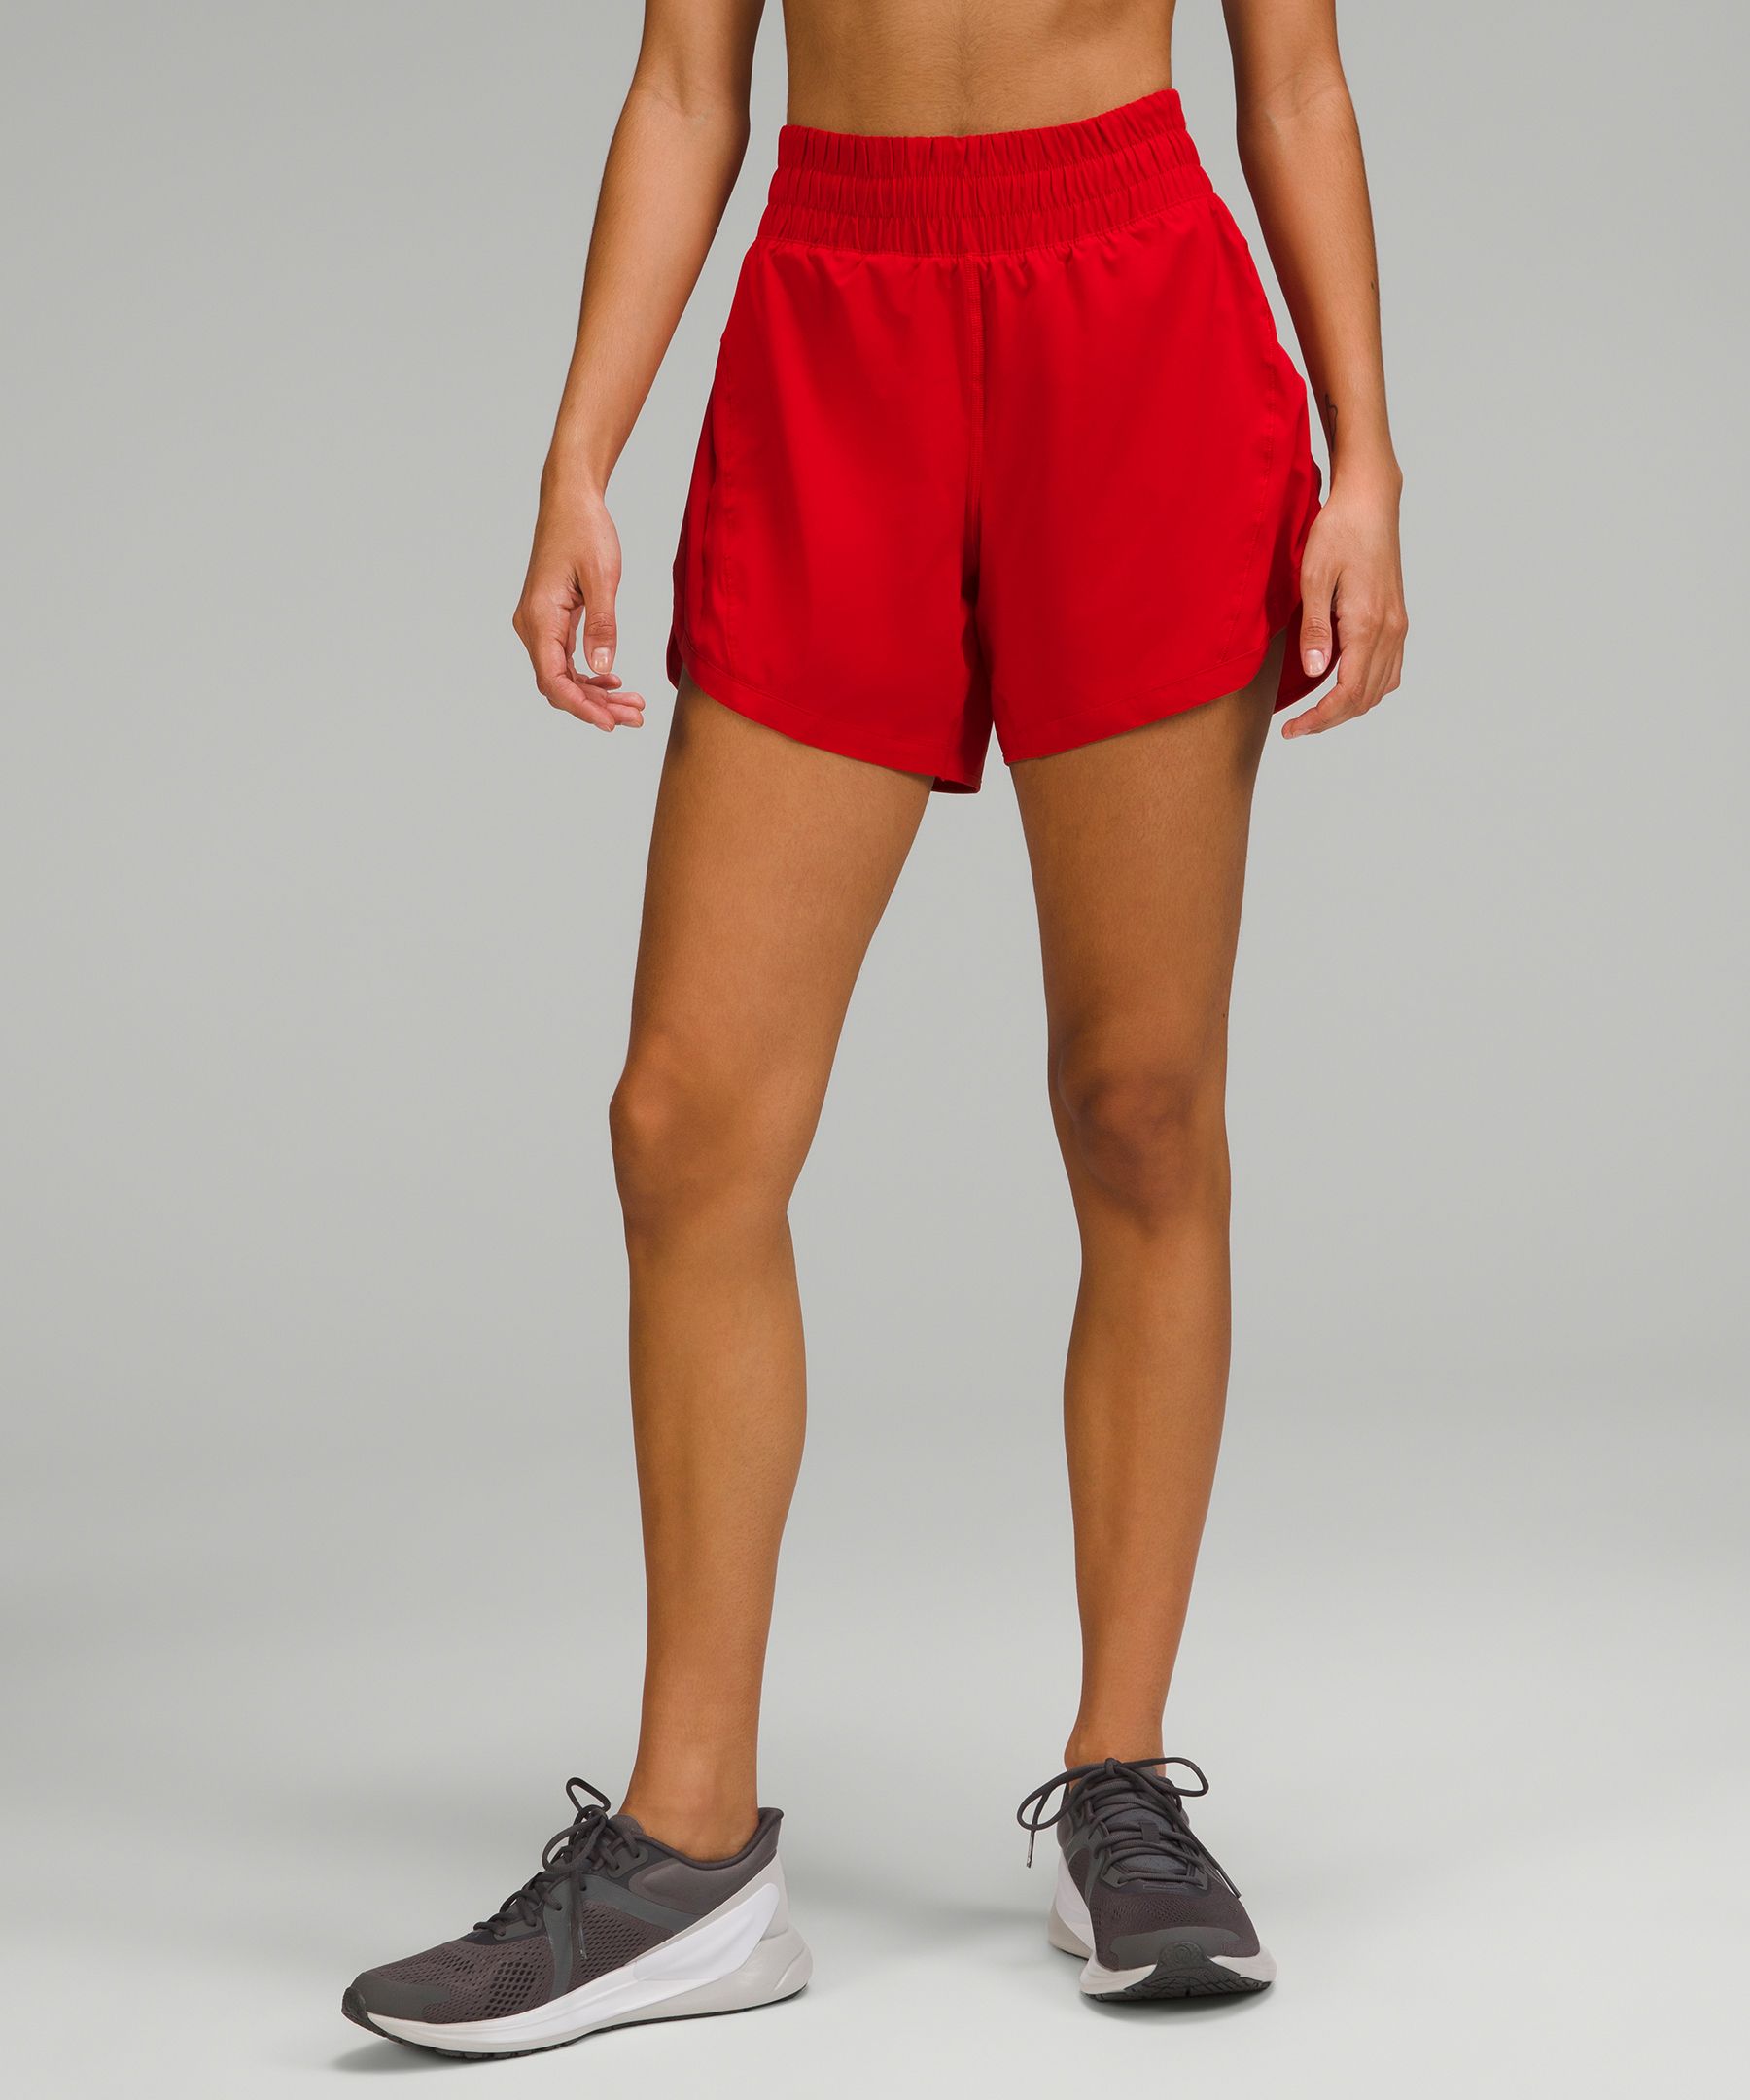 Lululemon Track That High-rise Lined Shorts 5" In Dark Red